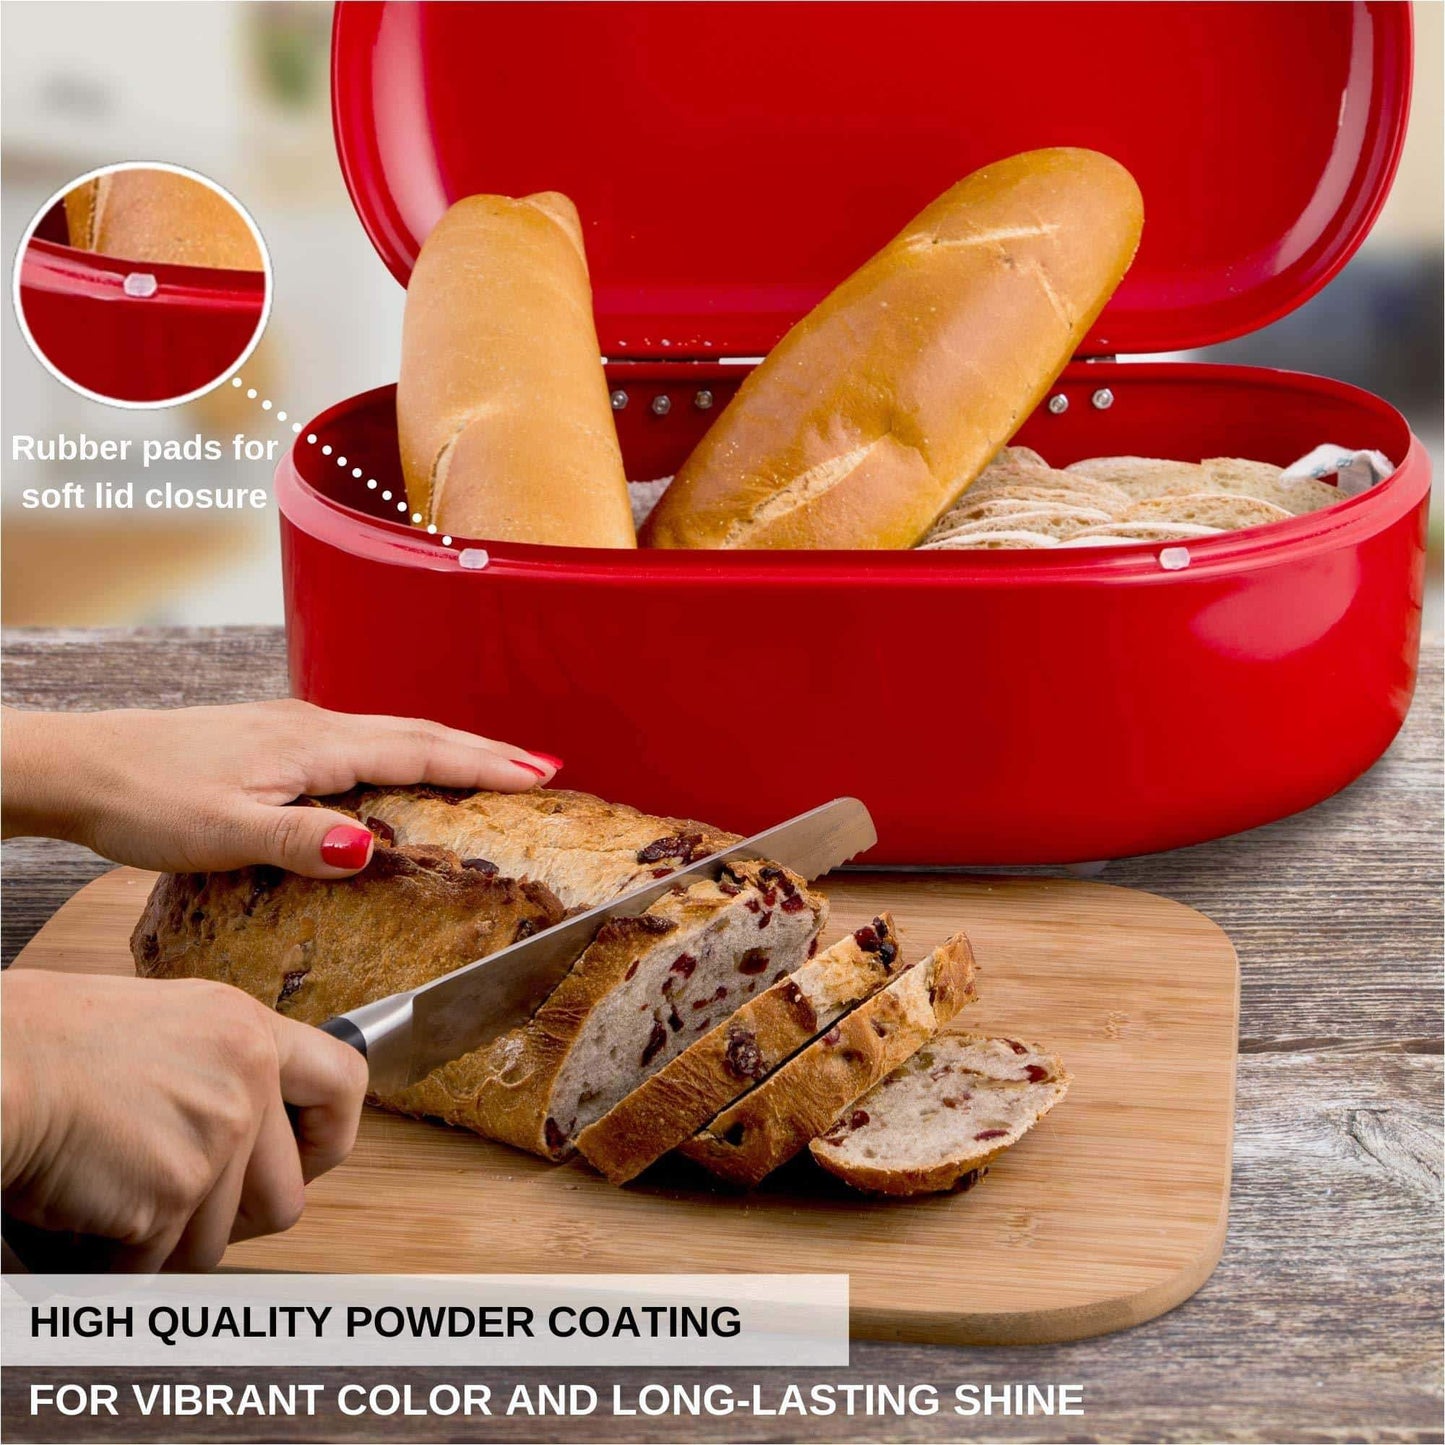 On amazon bread box red carbon steel large capacity sturdy metal food storage containers and bread boxes for kitchen counters retro countertop breadbox for loaves 15 7 x 10 8 x 7 inches